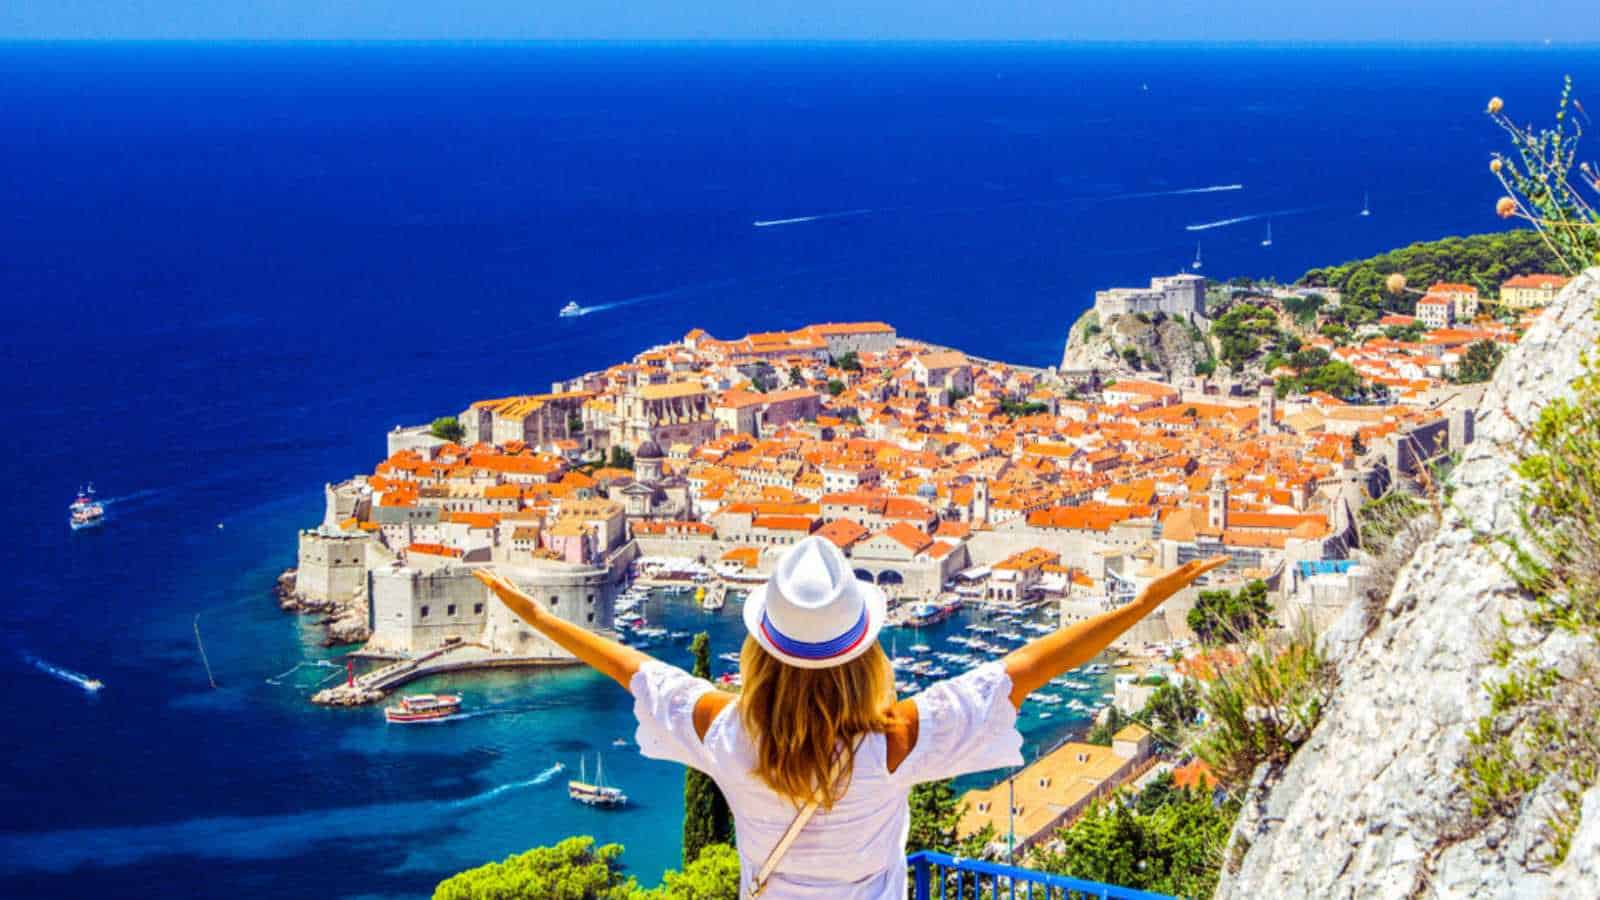 Happy woman enjoys view of old town (medieval Ragusa) and Dalmatian Coast of Adriatic Sea in Dubrovnik. Blue sea with white yachts, beautiful landscape, aerial view, Dubrovnik, Croatia